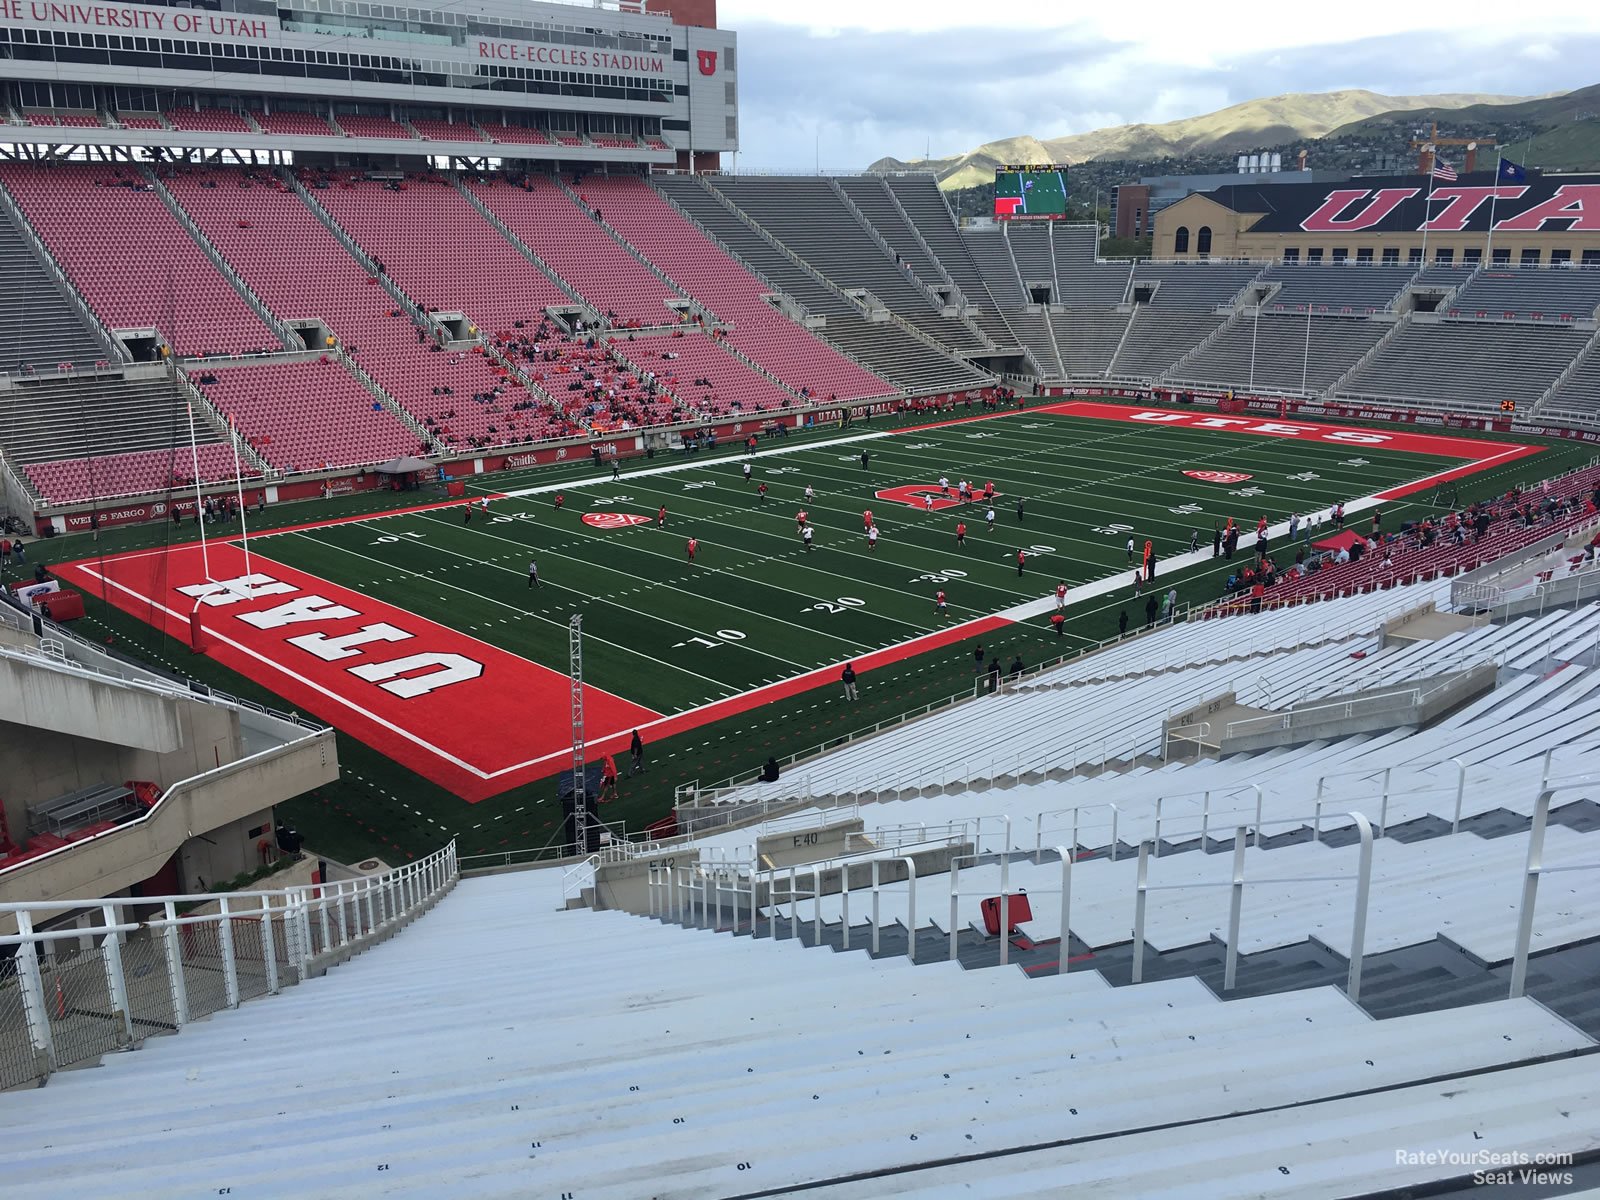 section e42, row 50 seat view  - rice-eccles stadium